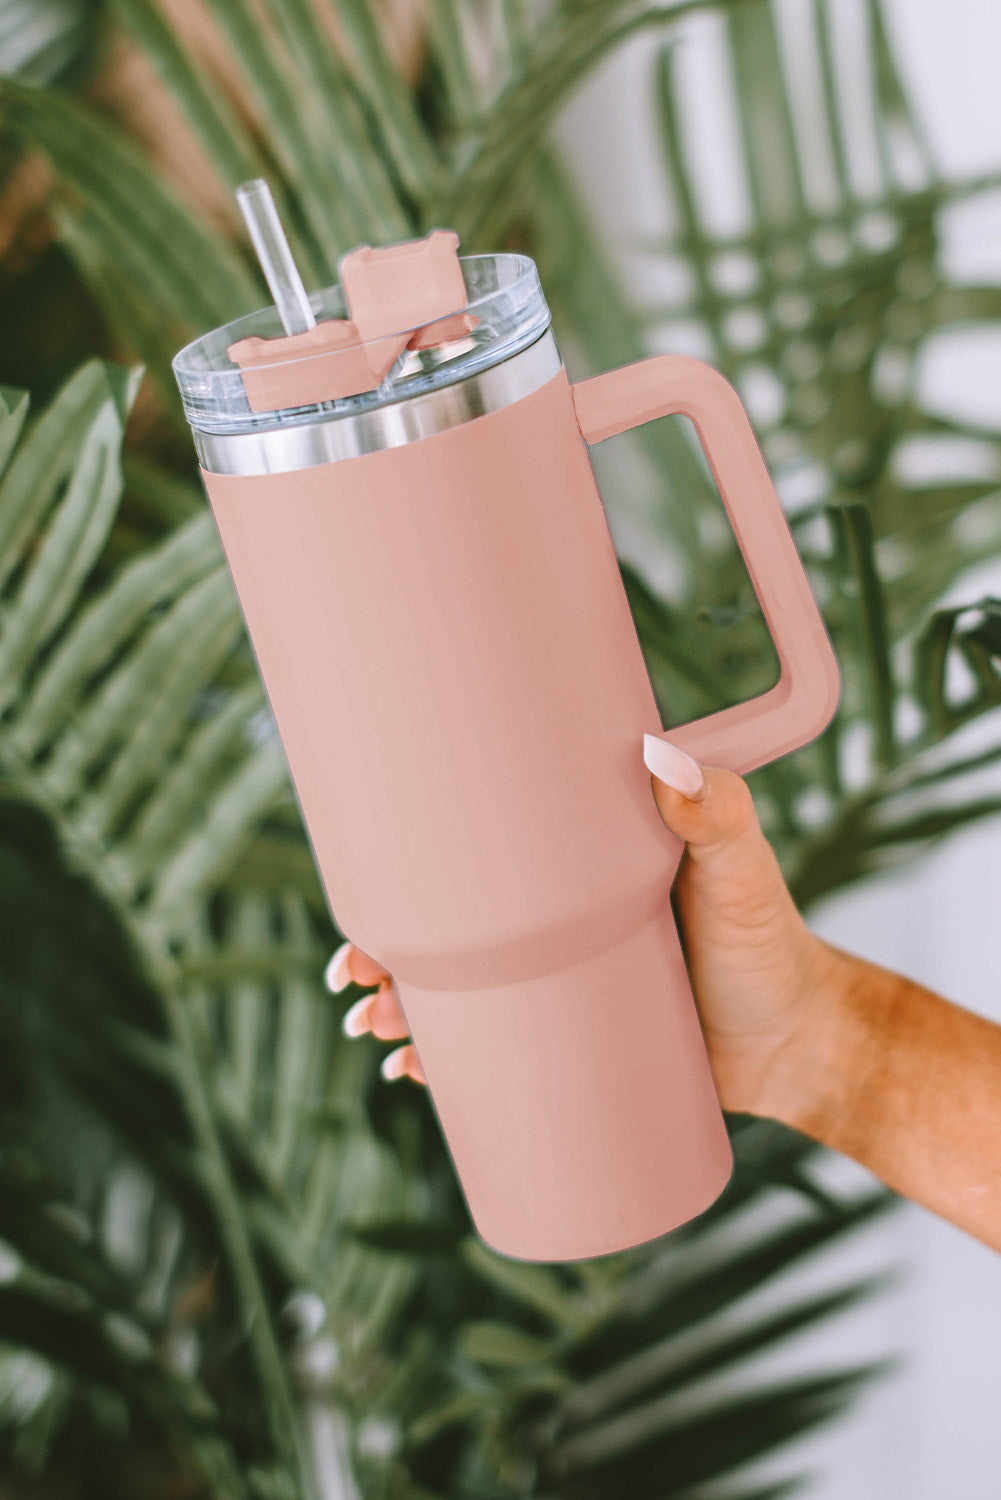 Rose Stainless Steel Double Insulated Cup 40oz